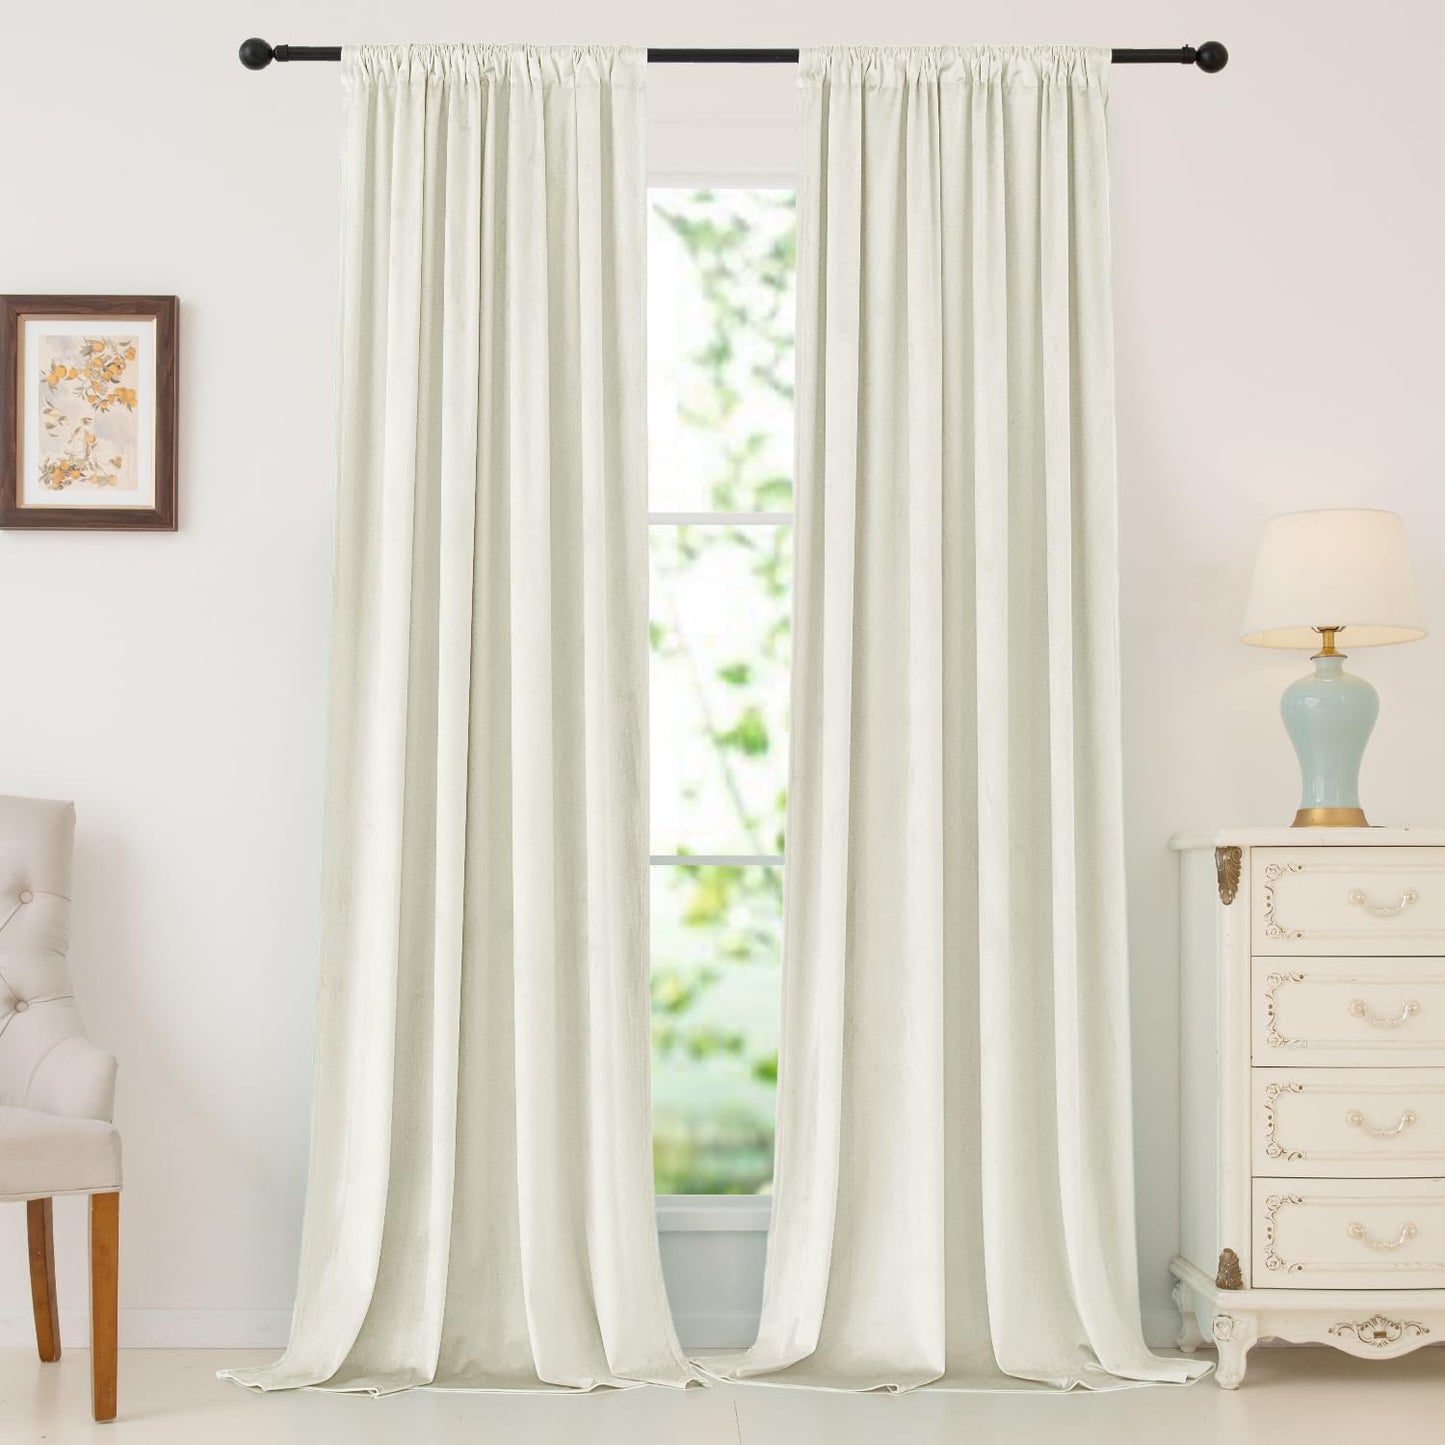 Nanbowang Green Velvet Curtains 63 Inches Long Dark Green Light Blocking Rod Pocket Window Curtain Panels Set of 2 Heat Insulated Curtains Thermal Curtain Panels for Bedroom  nanbowang Cream 52"X108" 